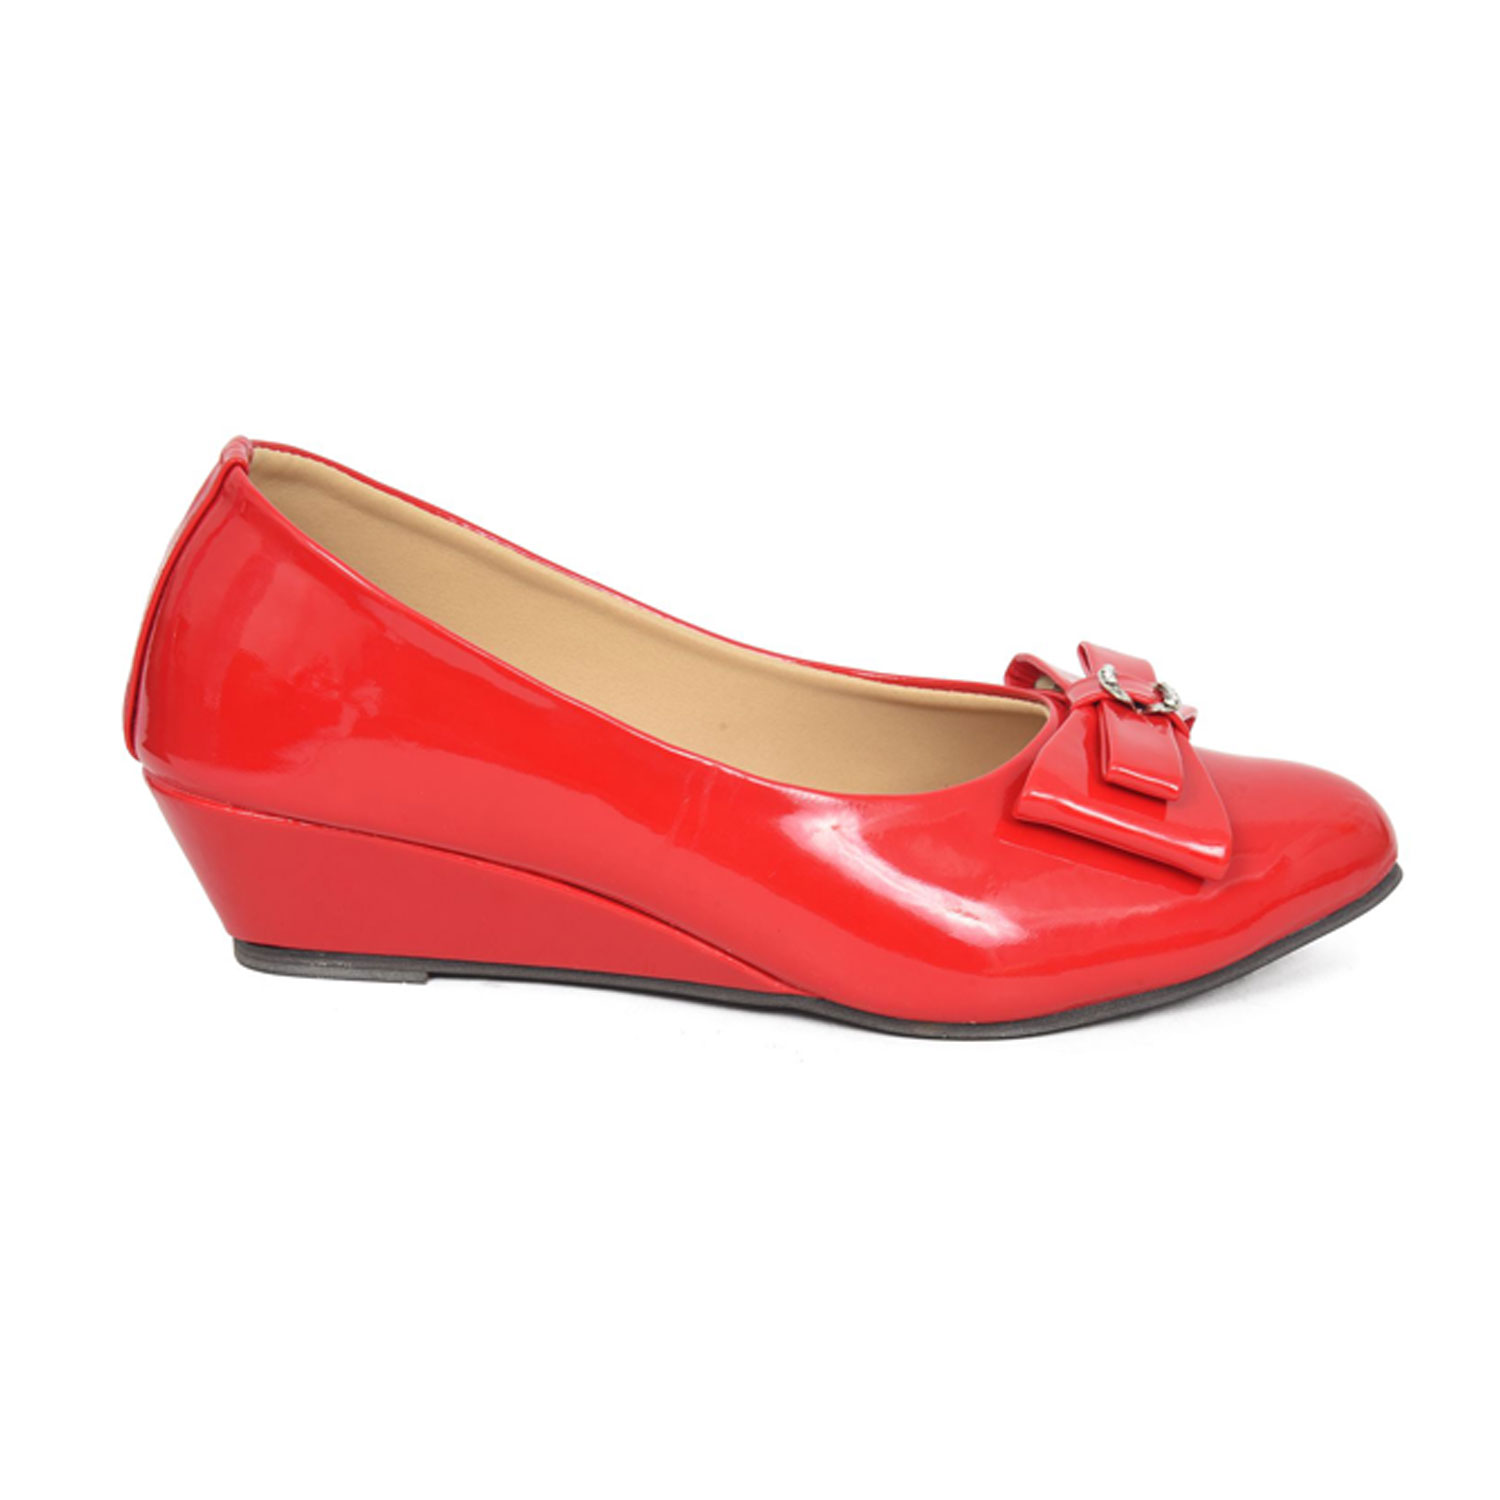 Racecourse Girl's Wedges Heel Patent Leather Full Shoe Belly With the Heel Height of 1.5 Inch 9026 Red(Pack of 8)